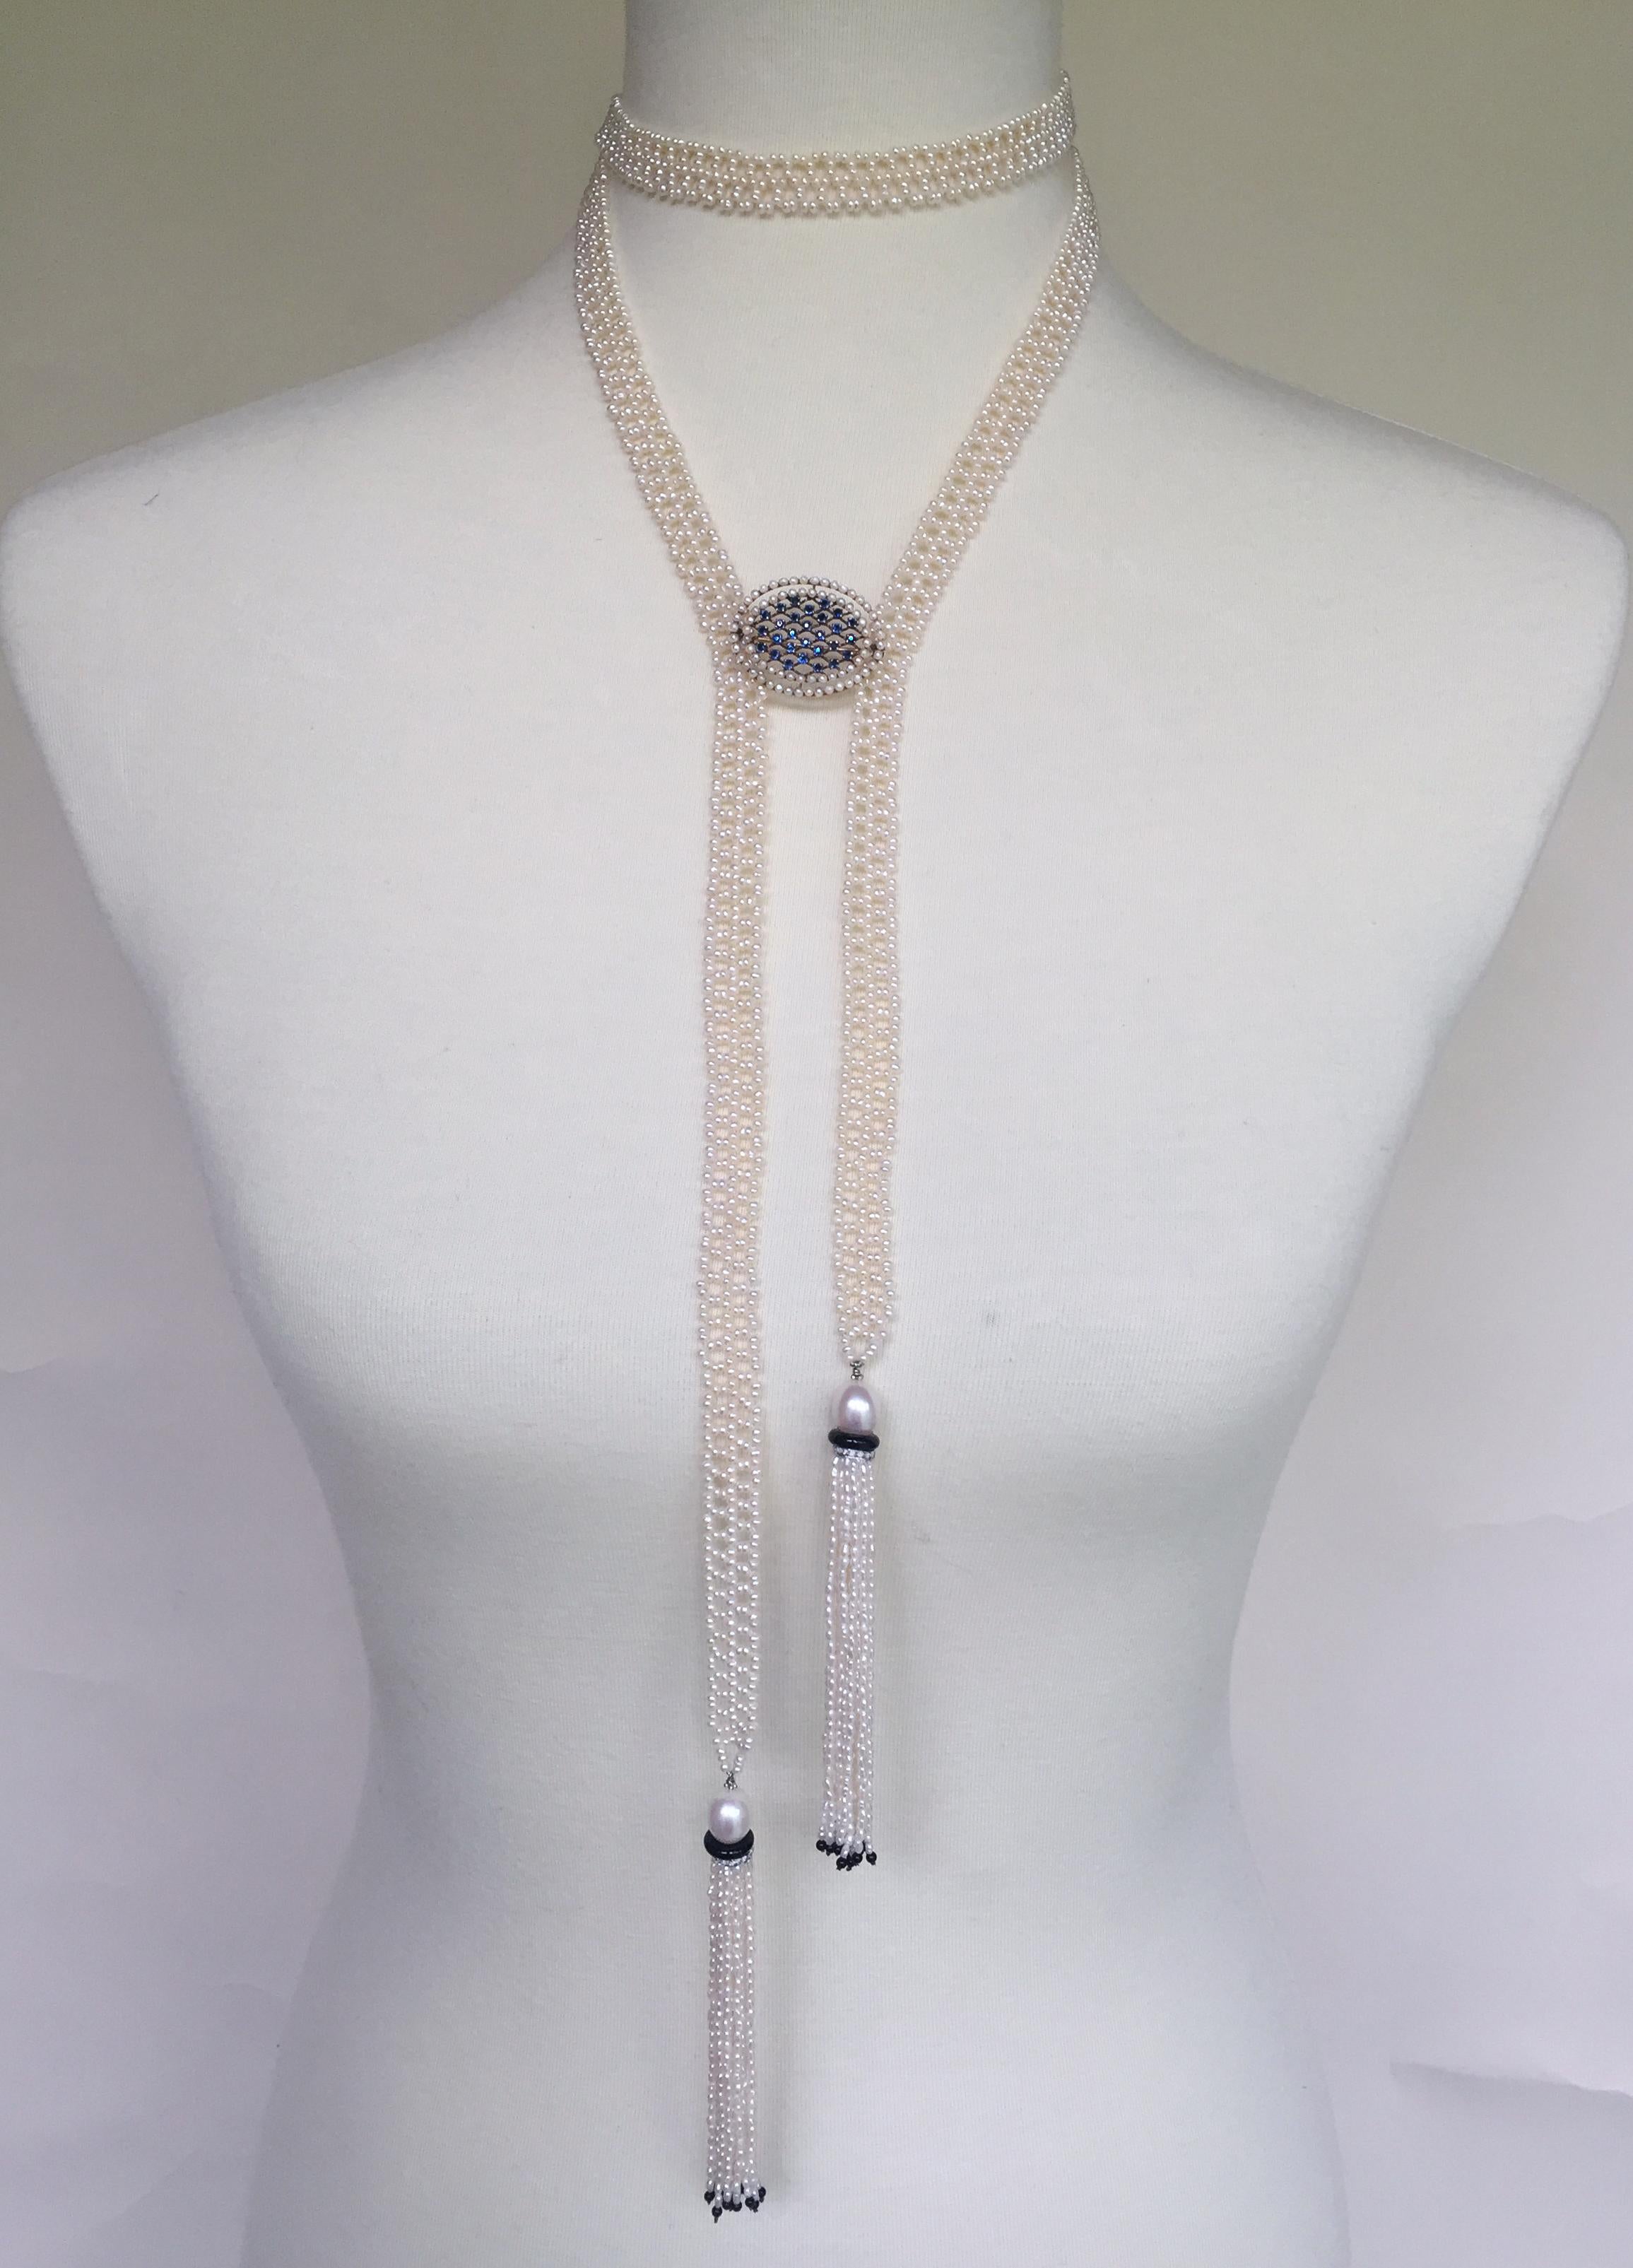 This woven white seed pearl sautoir necklace with pearl, black onyx, and diamond tassels is handwoven by Marina J. The woven intricate design is sophisticated with its ribbon-like design and glowing small white natural pearls, with a button shape.